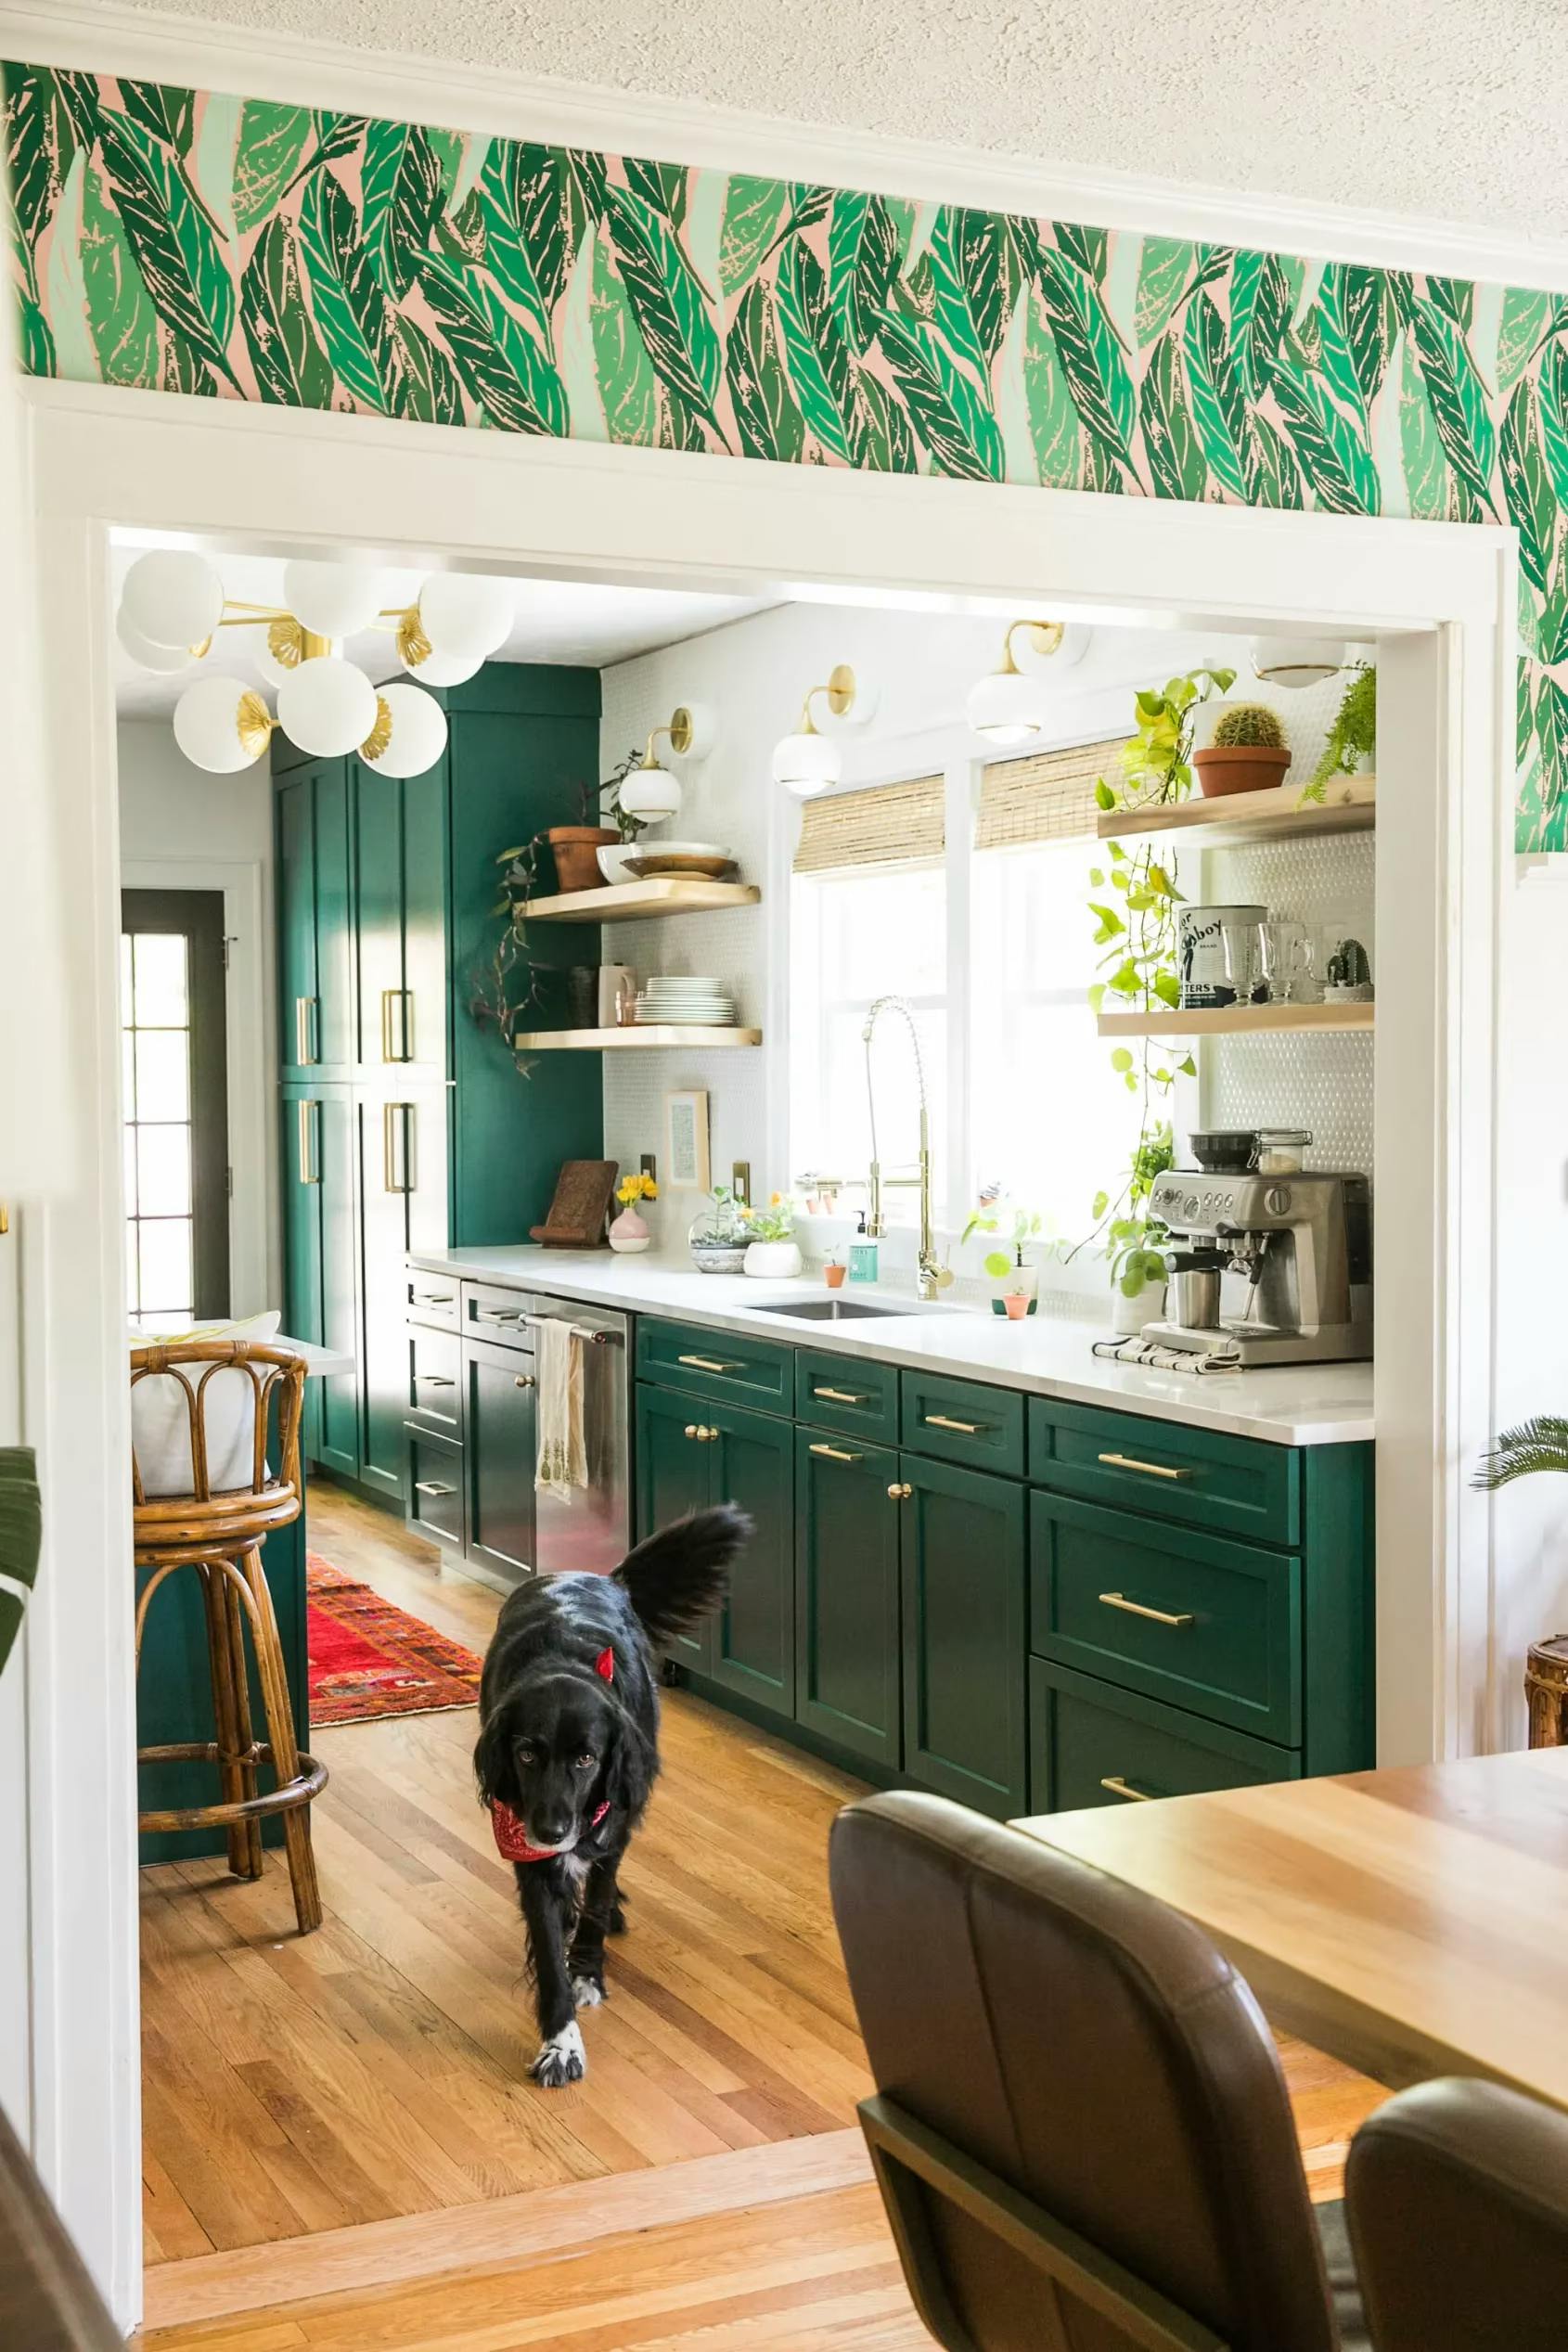 Forest Green by Benjamin Moore, featured in Apartment Therapy, photo by Jessica Brigham